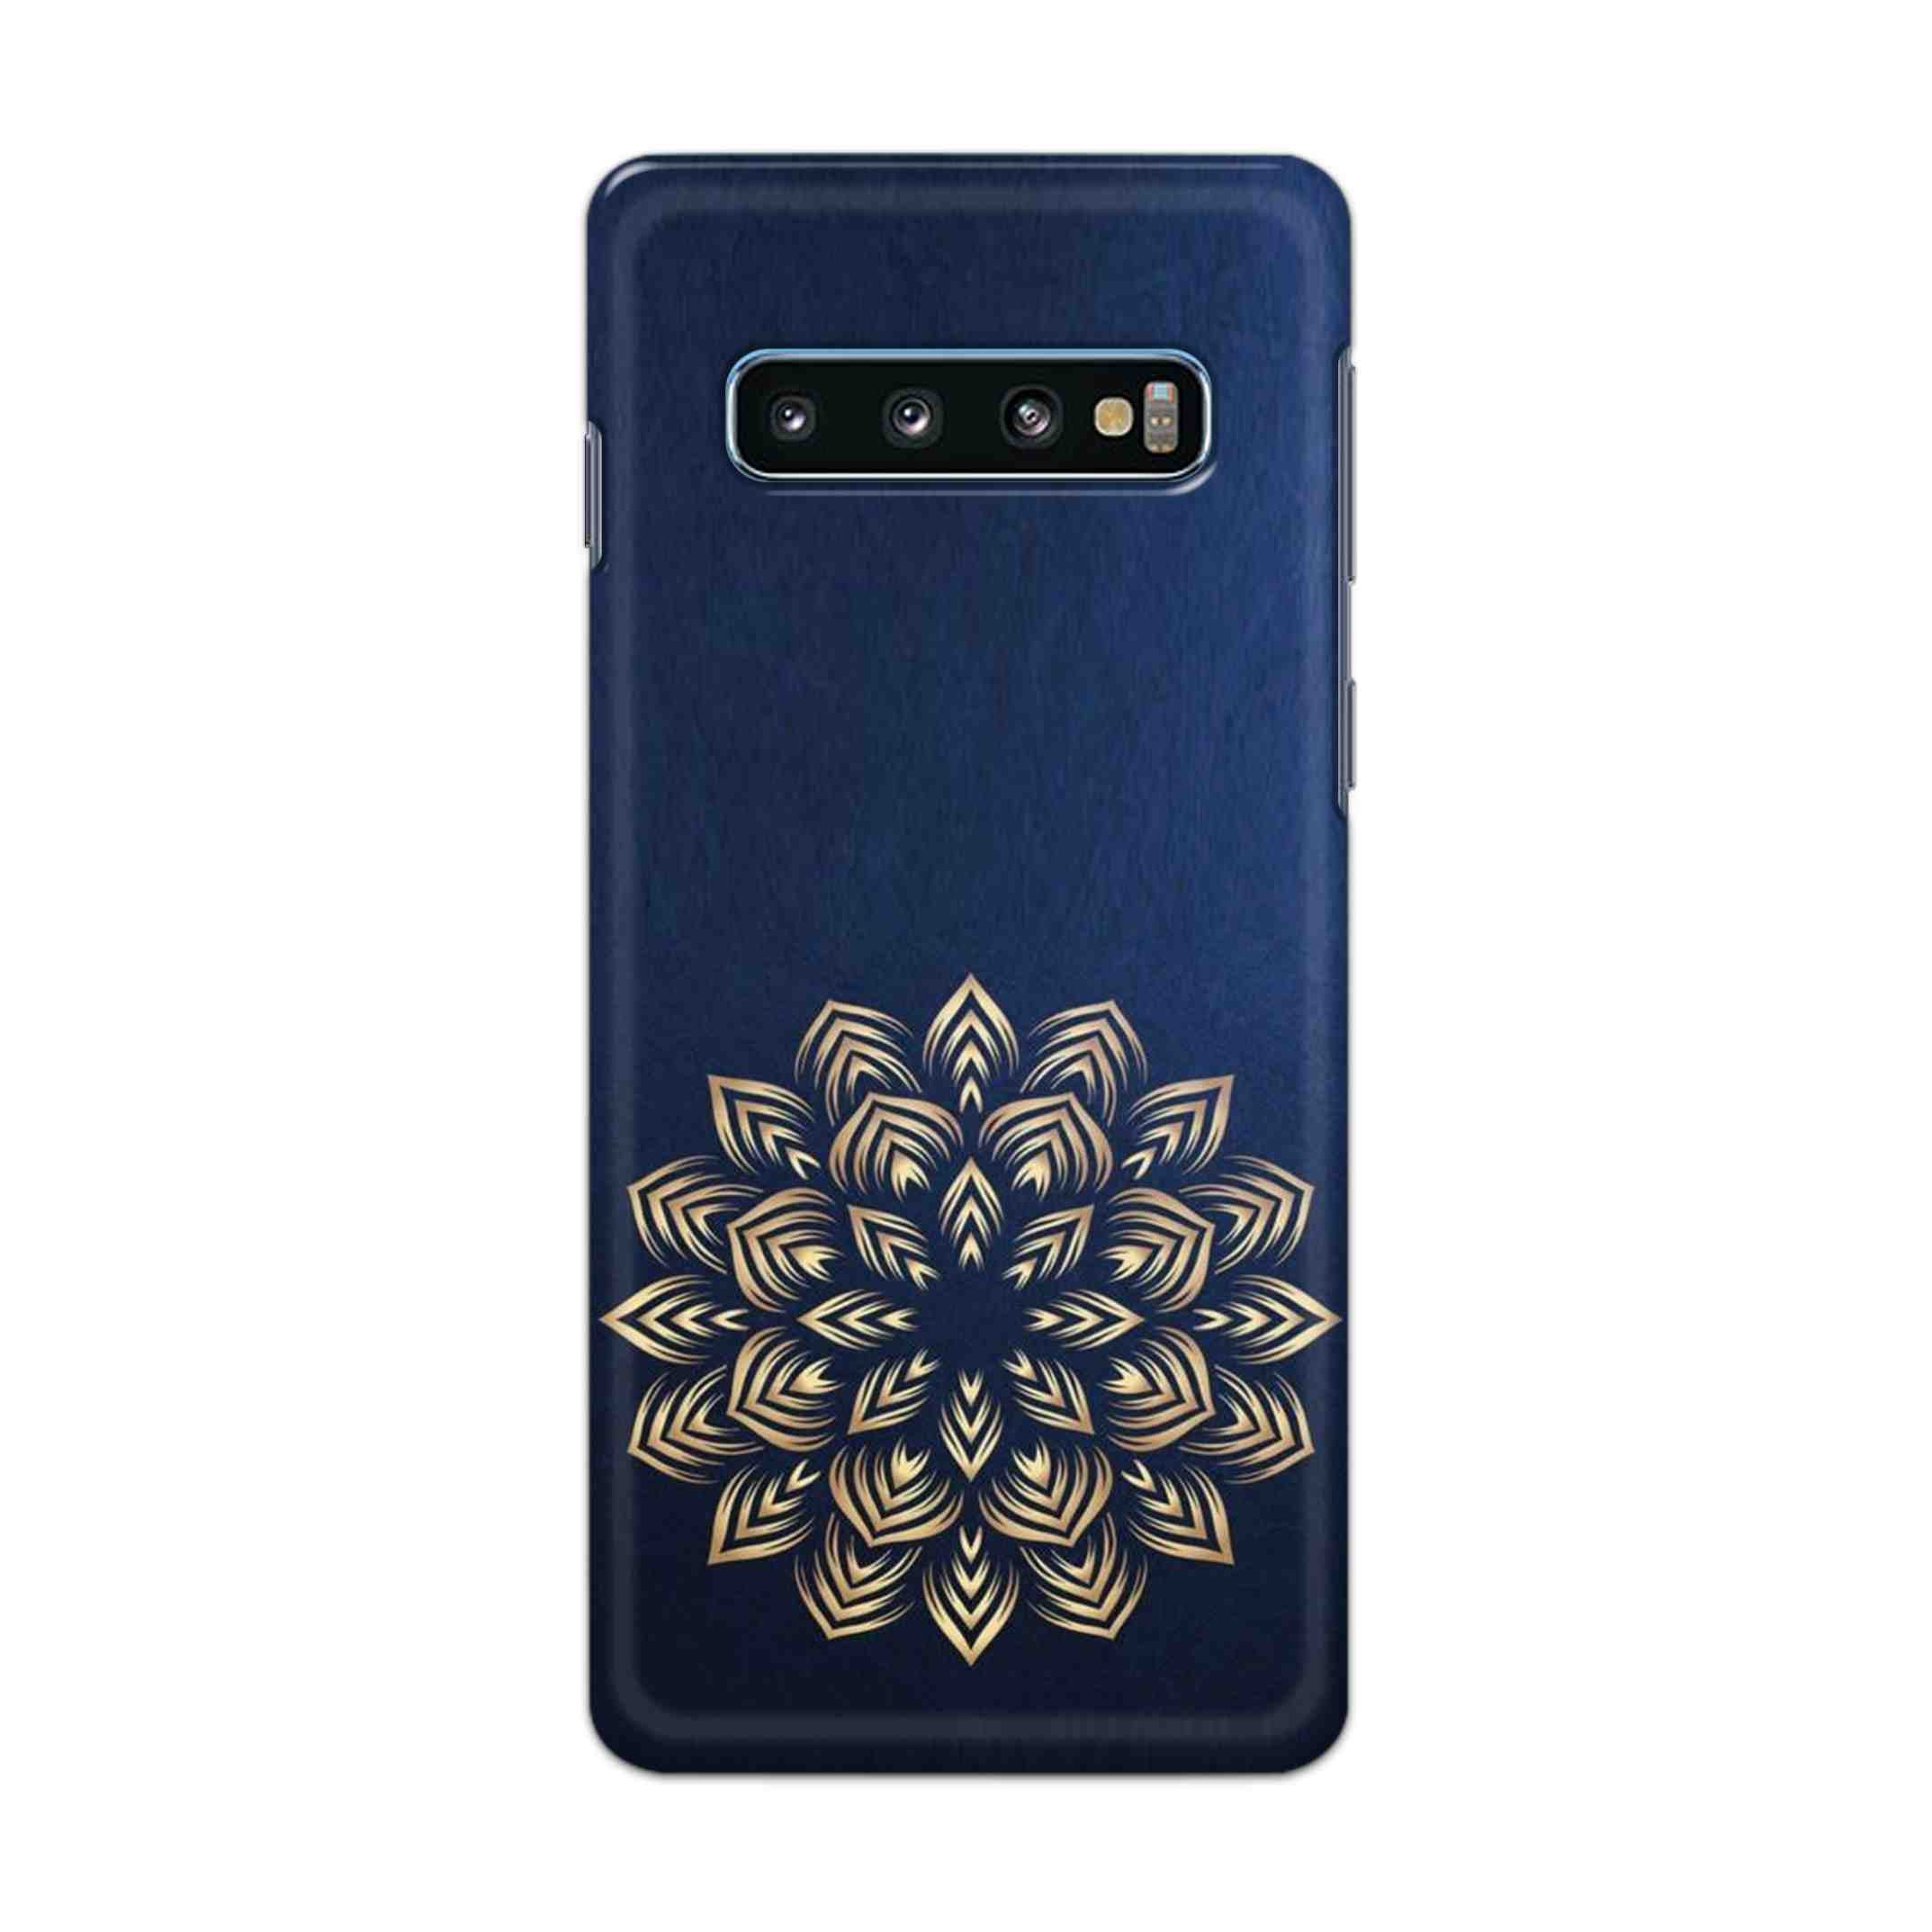 Buy Heart Mandala Hard Back Mobile Phone Case Cover For Samsung Galaxy S10 Plus Online